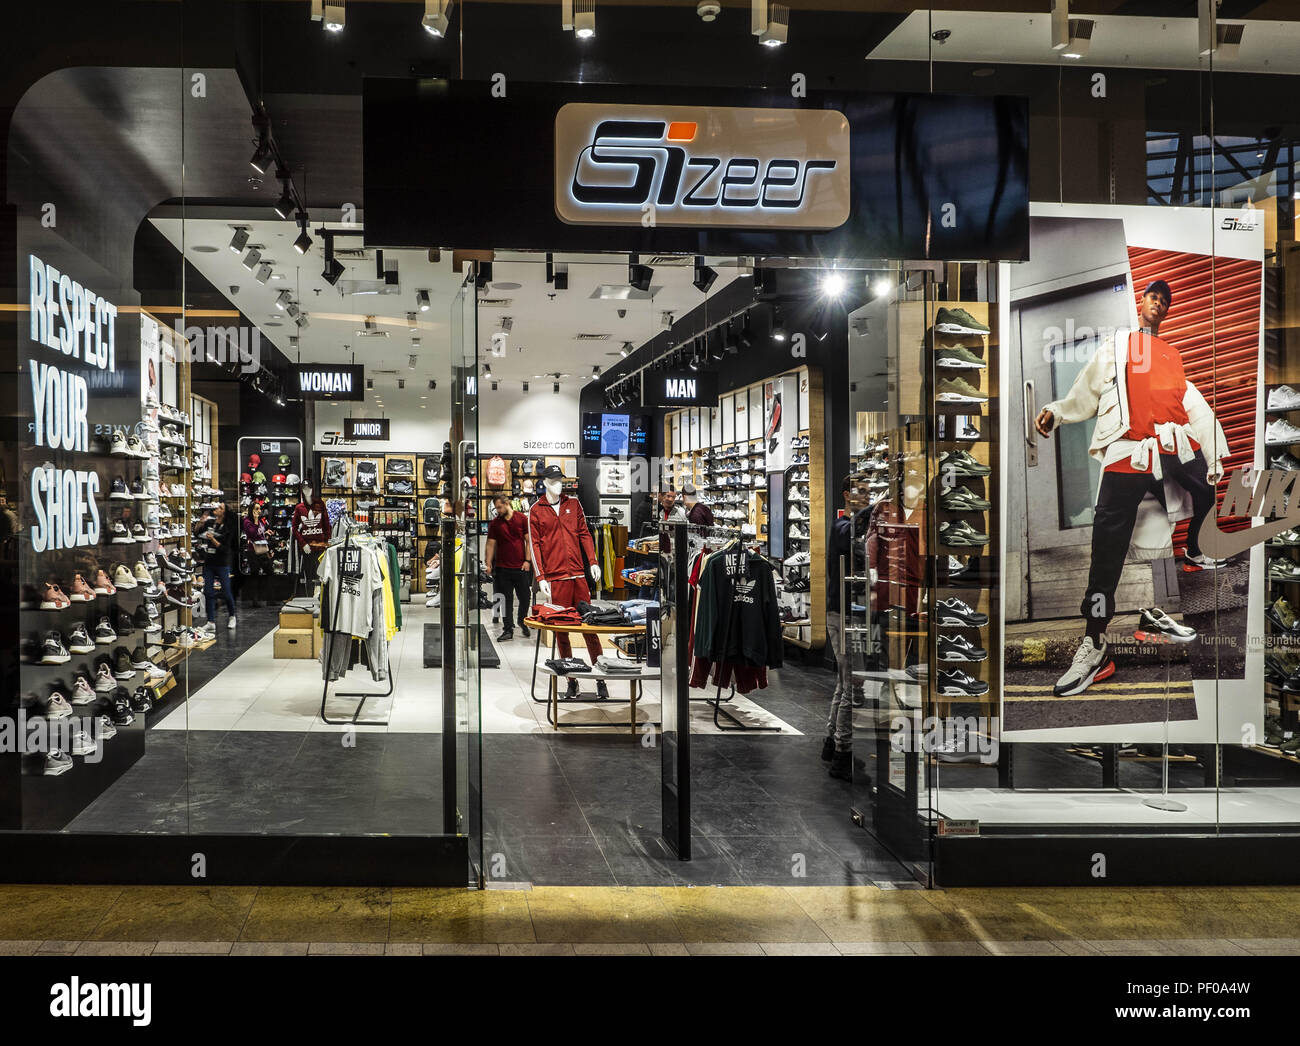 Krakow, Poland. 20th Mar, 2018. Sizeer store at Bonarka City Center.The  city of Krakow is located in southern Poland and it is the second largest  city in terms of population in Poland,